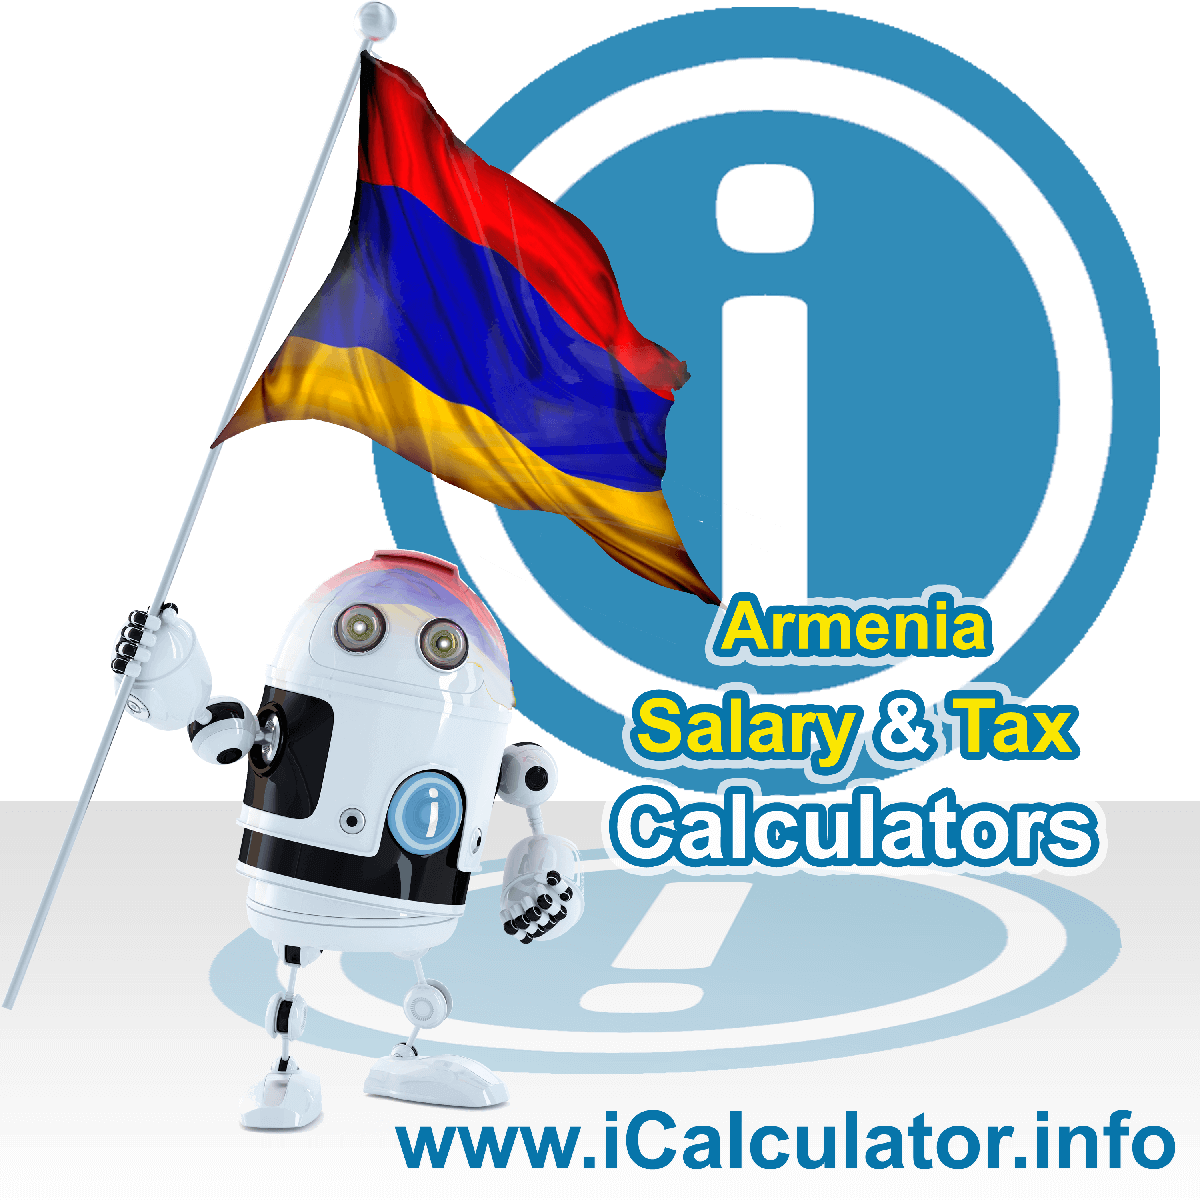 Armenia Salary Calculator. This image shows the Armeniaese flag and information relating to the tax formula for the Armenia Tax Calculator